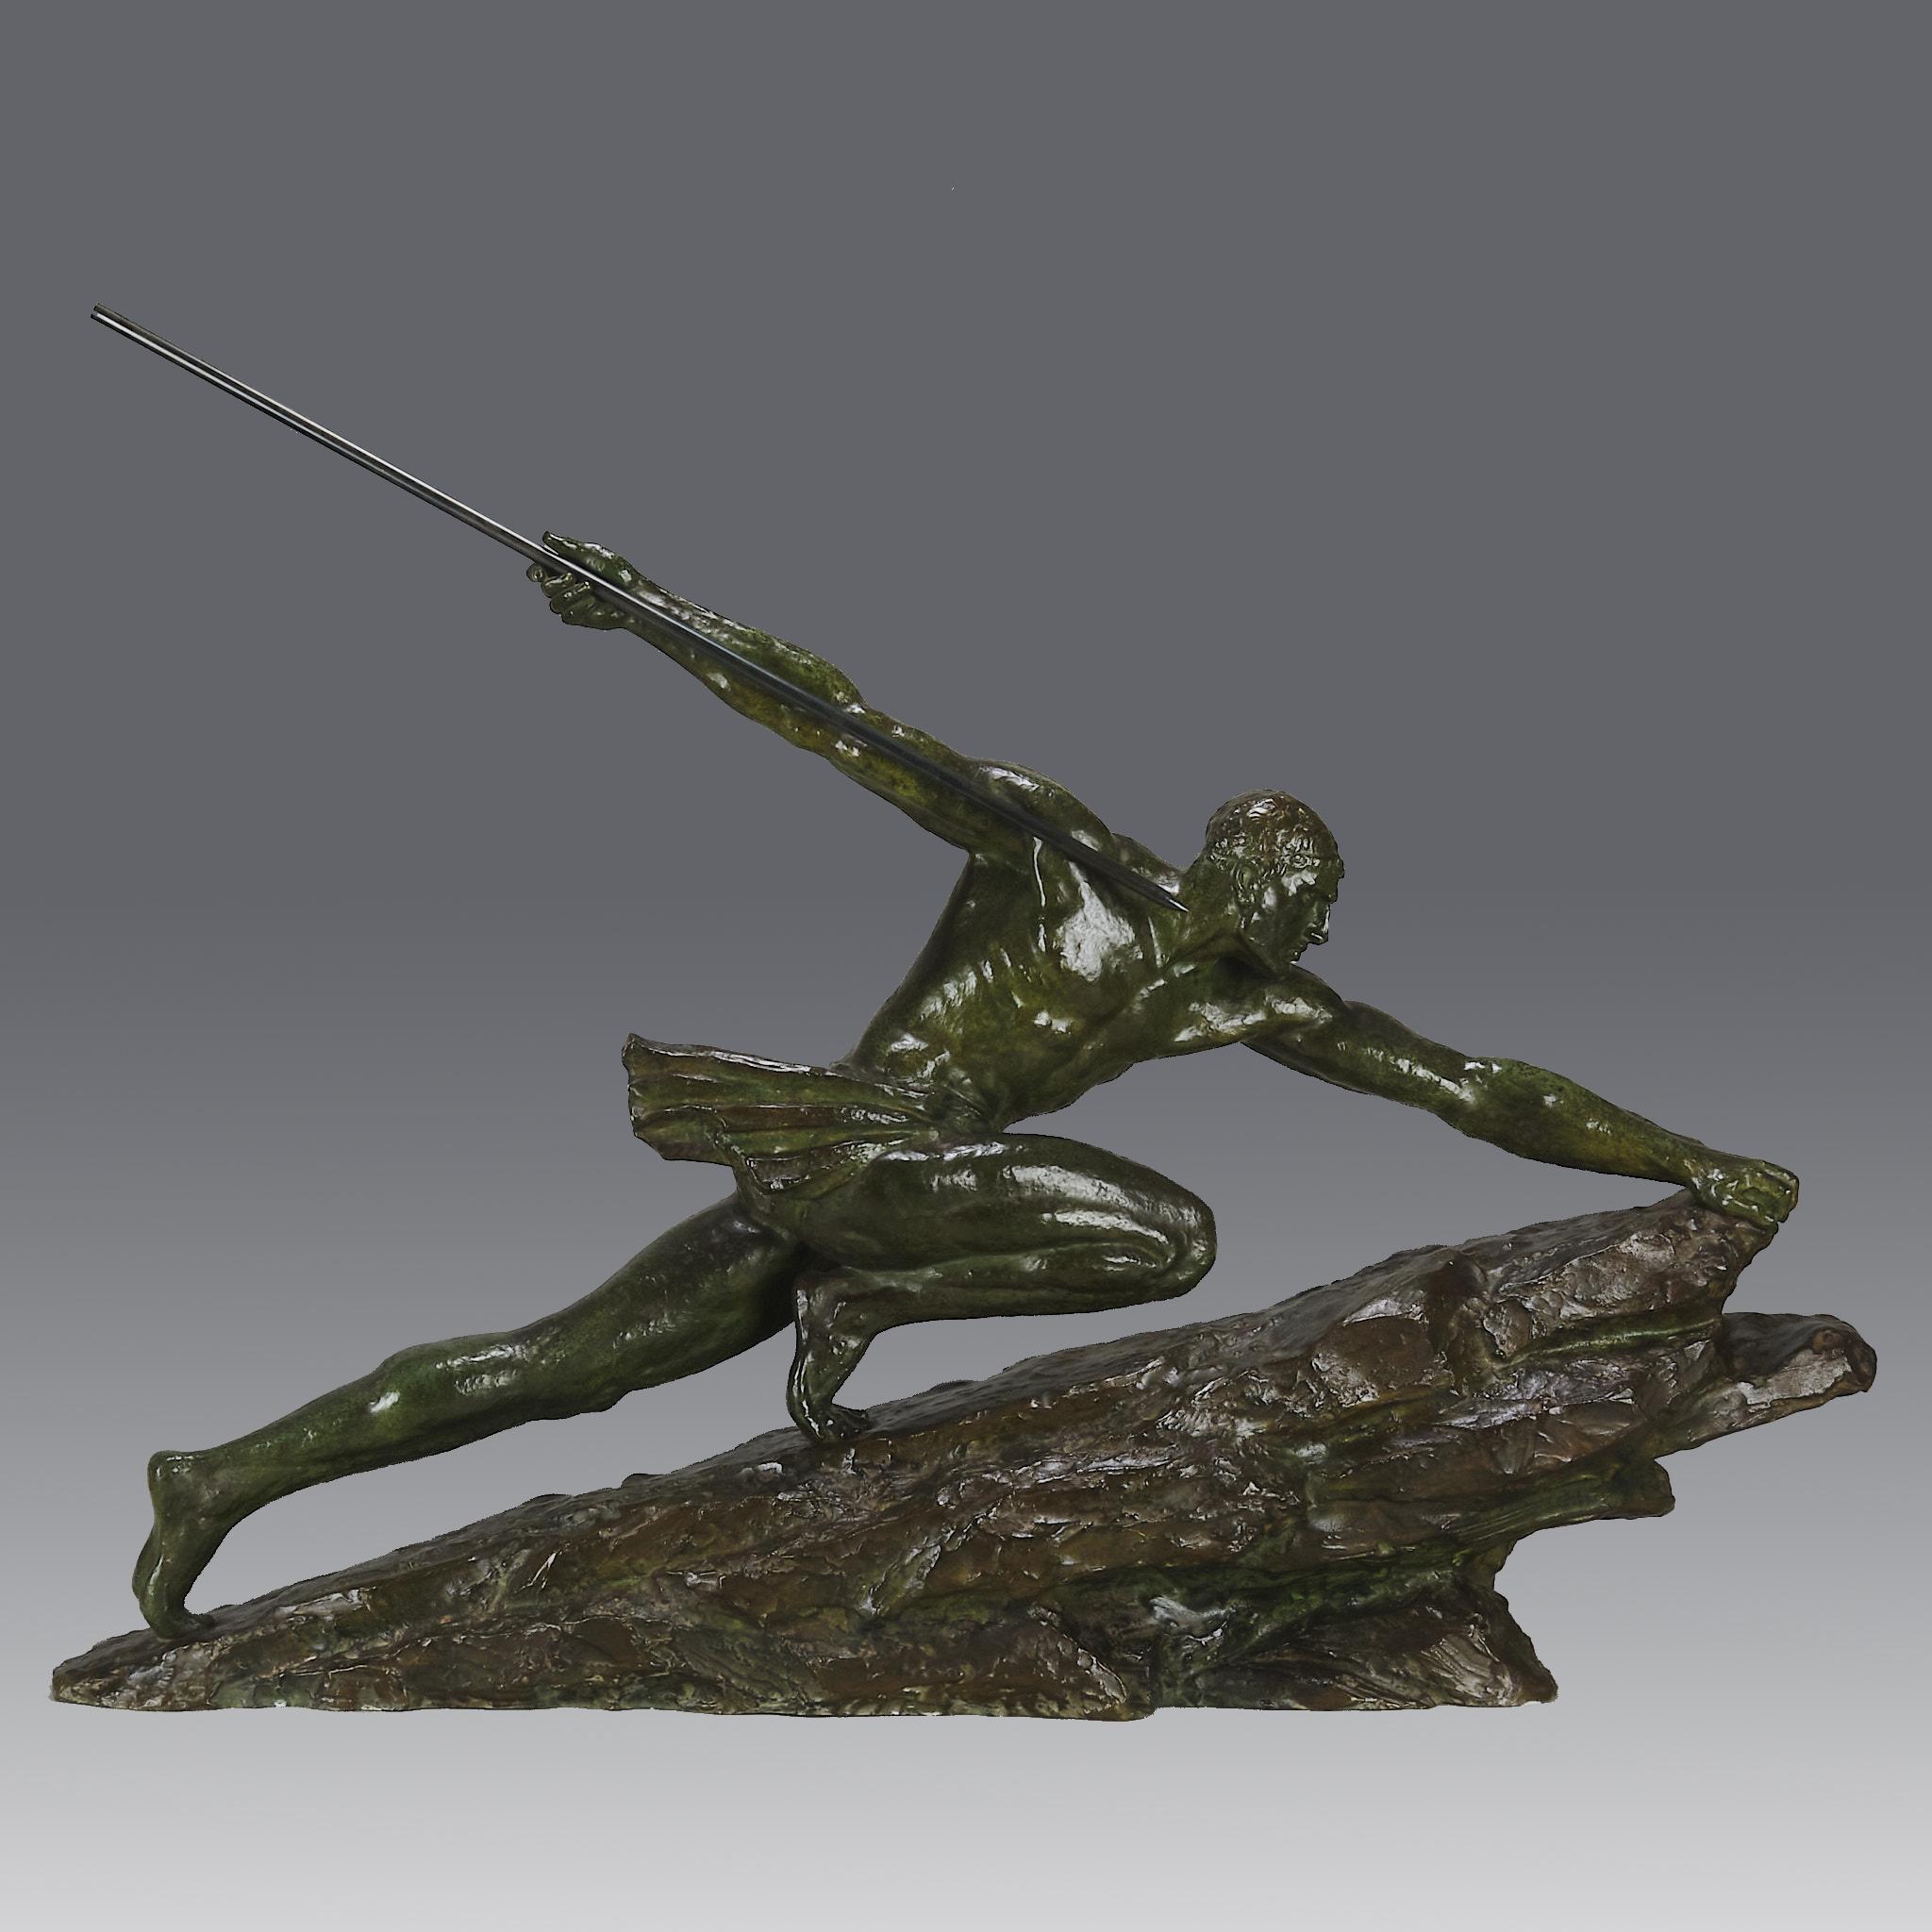 An iconic large Art Deco bronze sculpture of a strong athletic man in a powerful pose holding a long spear in his hand as he climbs a large boulder. The bronze with stunningly rich green colour and excellent hand finished detail, signed Le Faguays